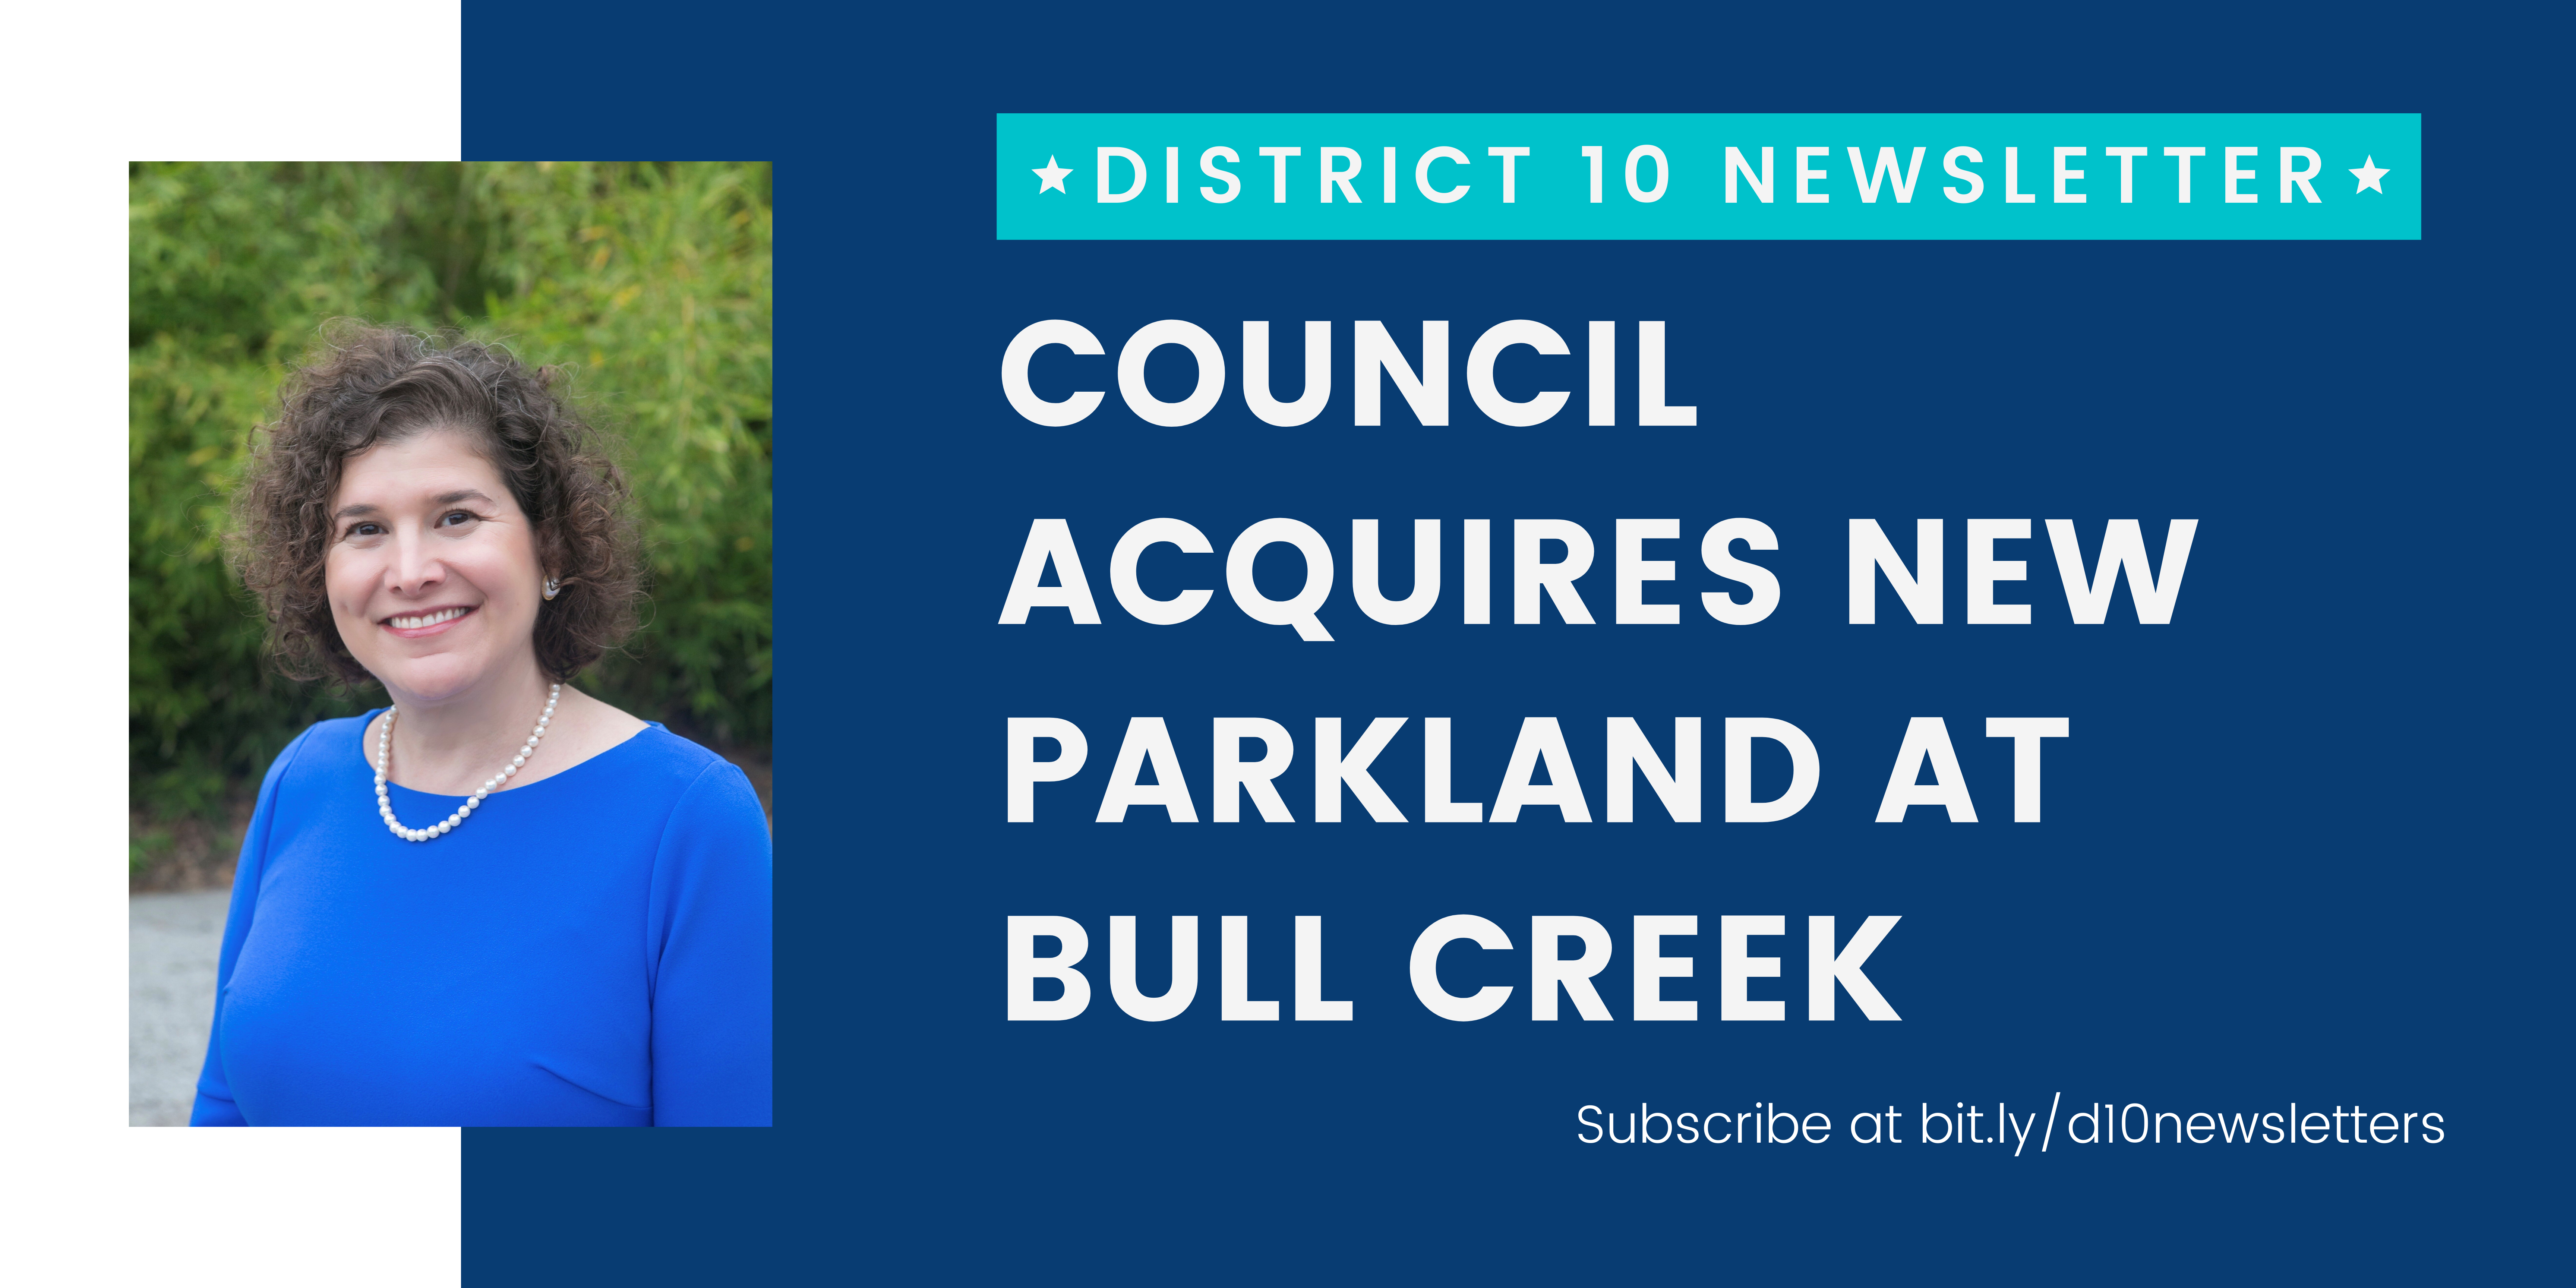 District 10 Newsletter; Council acquires new parkland at  bull creek. Subscribe at bit.ly/d10newsletters